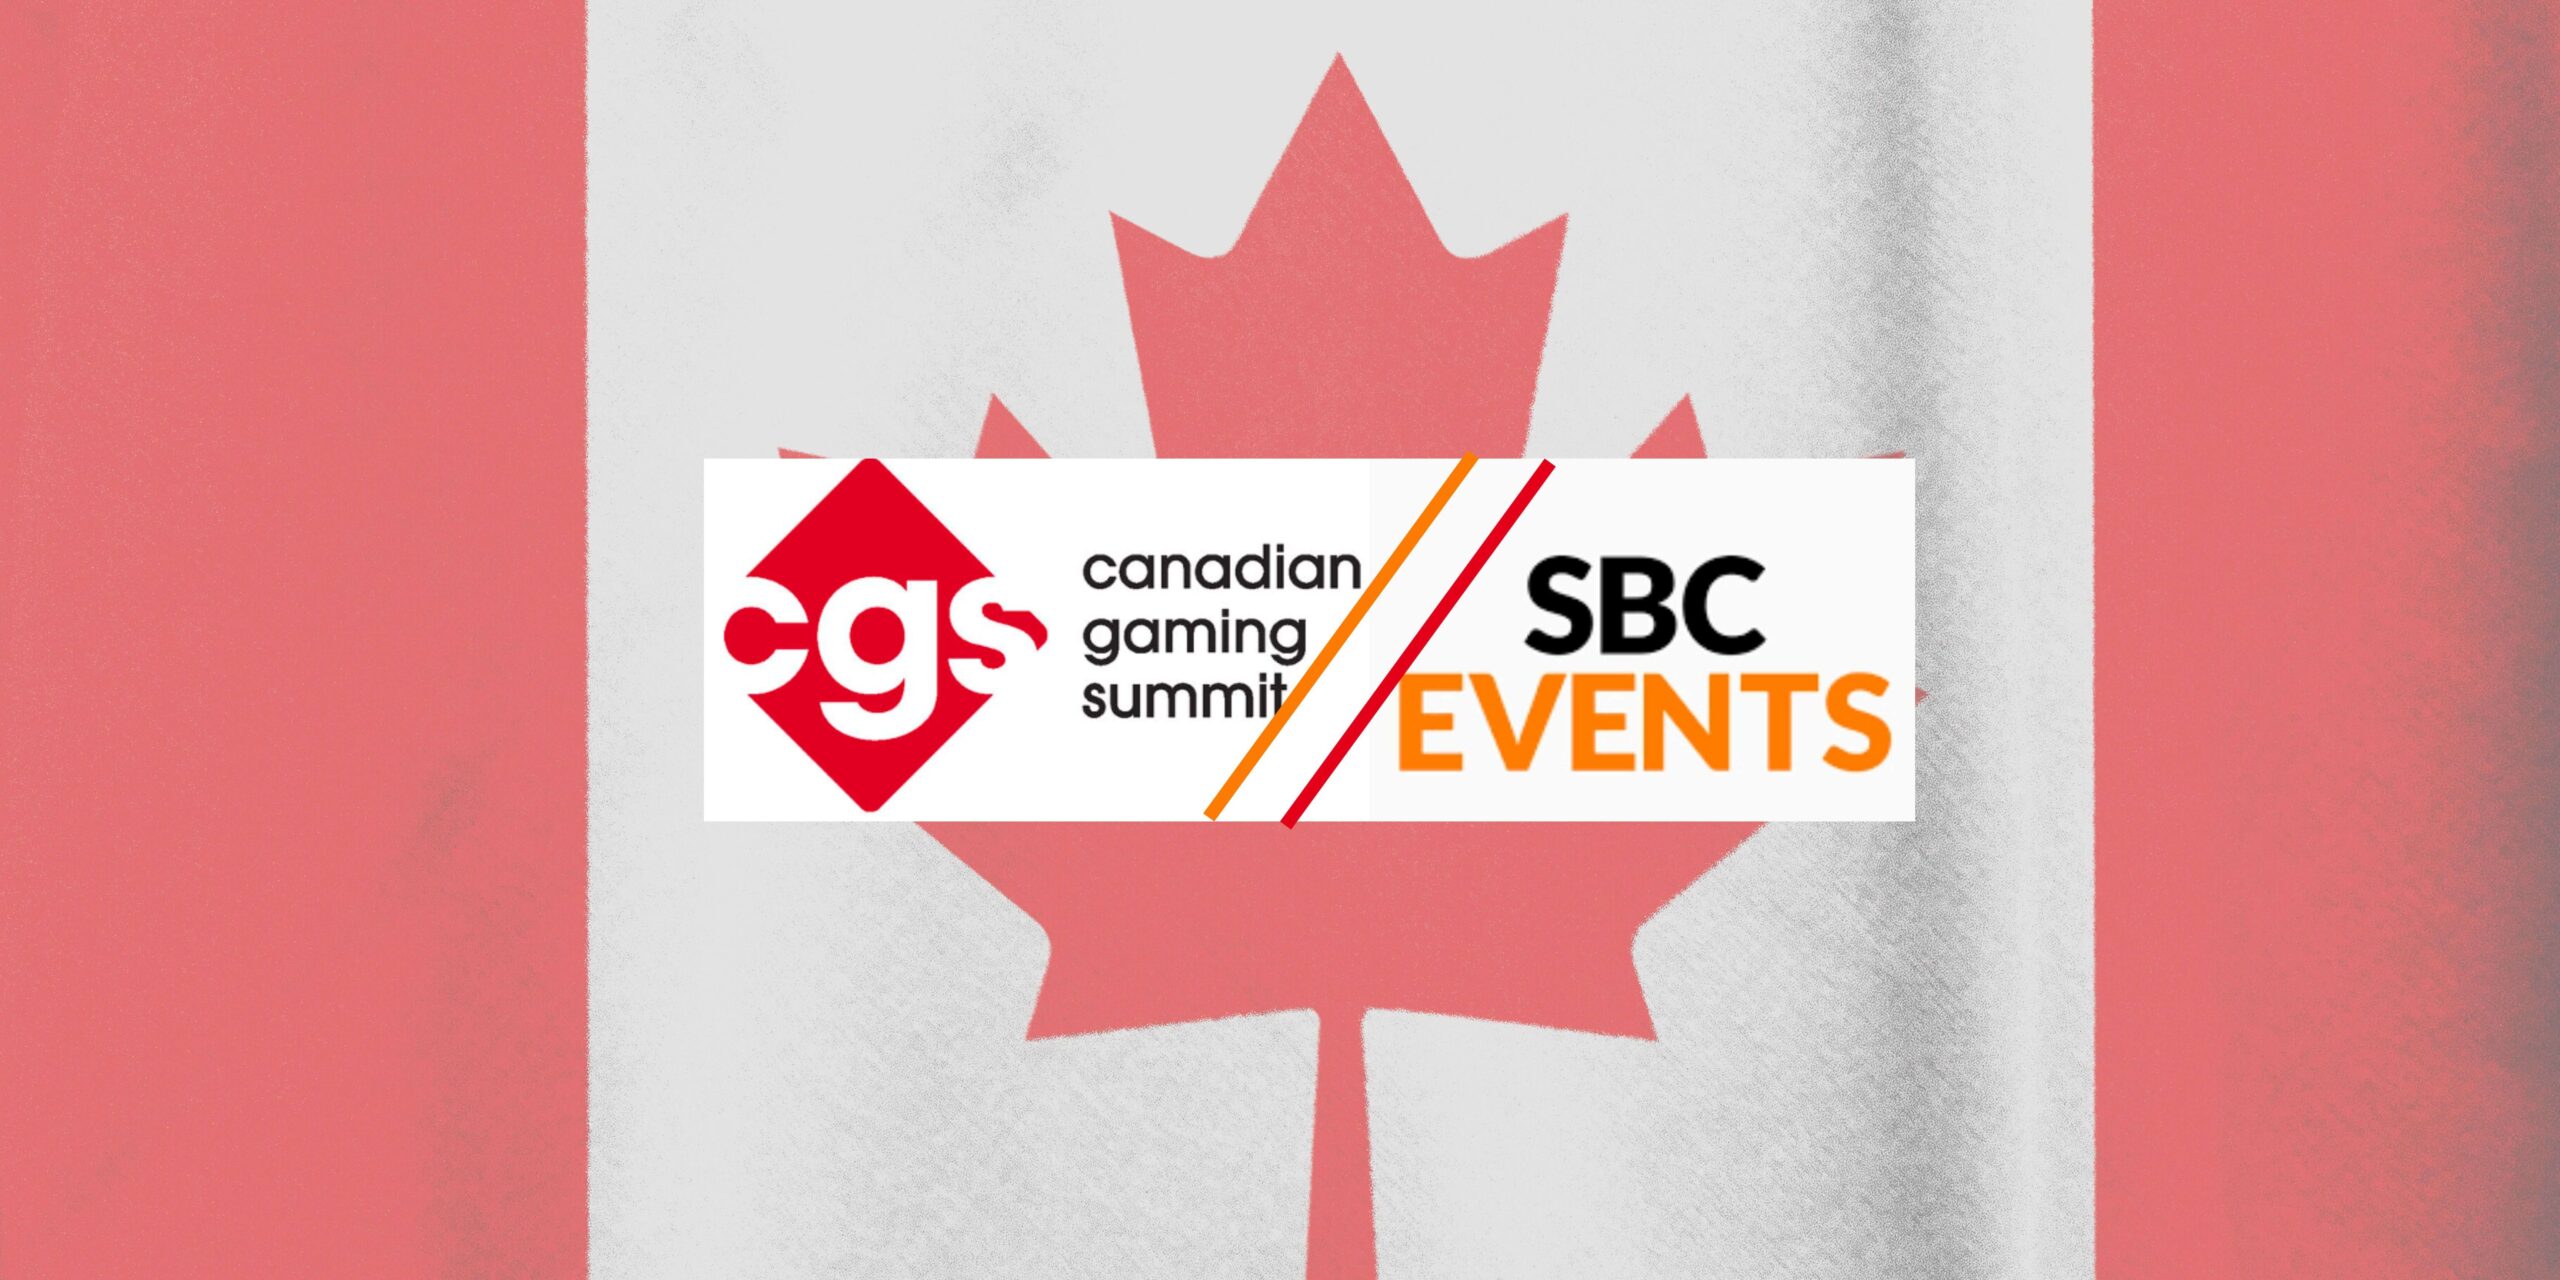 SBC Finalizes Contract and Buys the Canadian Gaming Summit